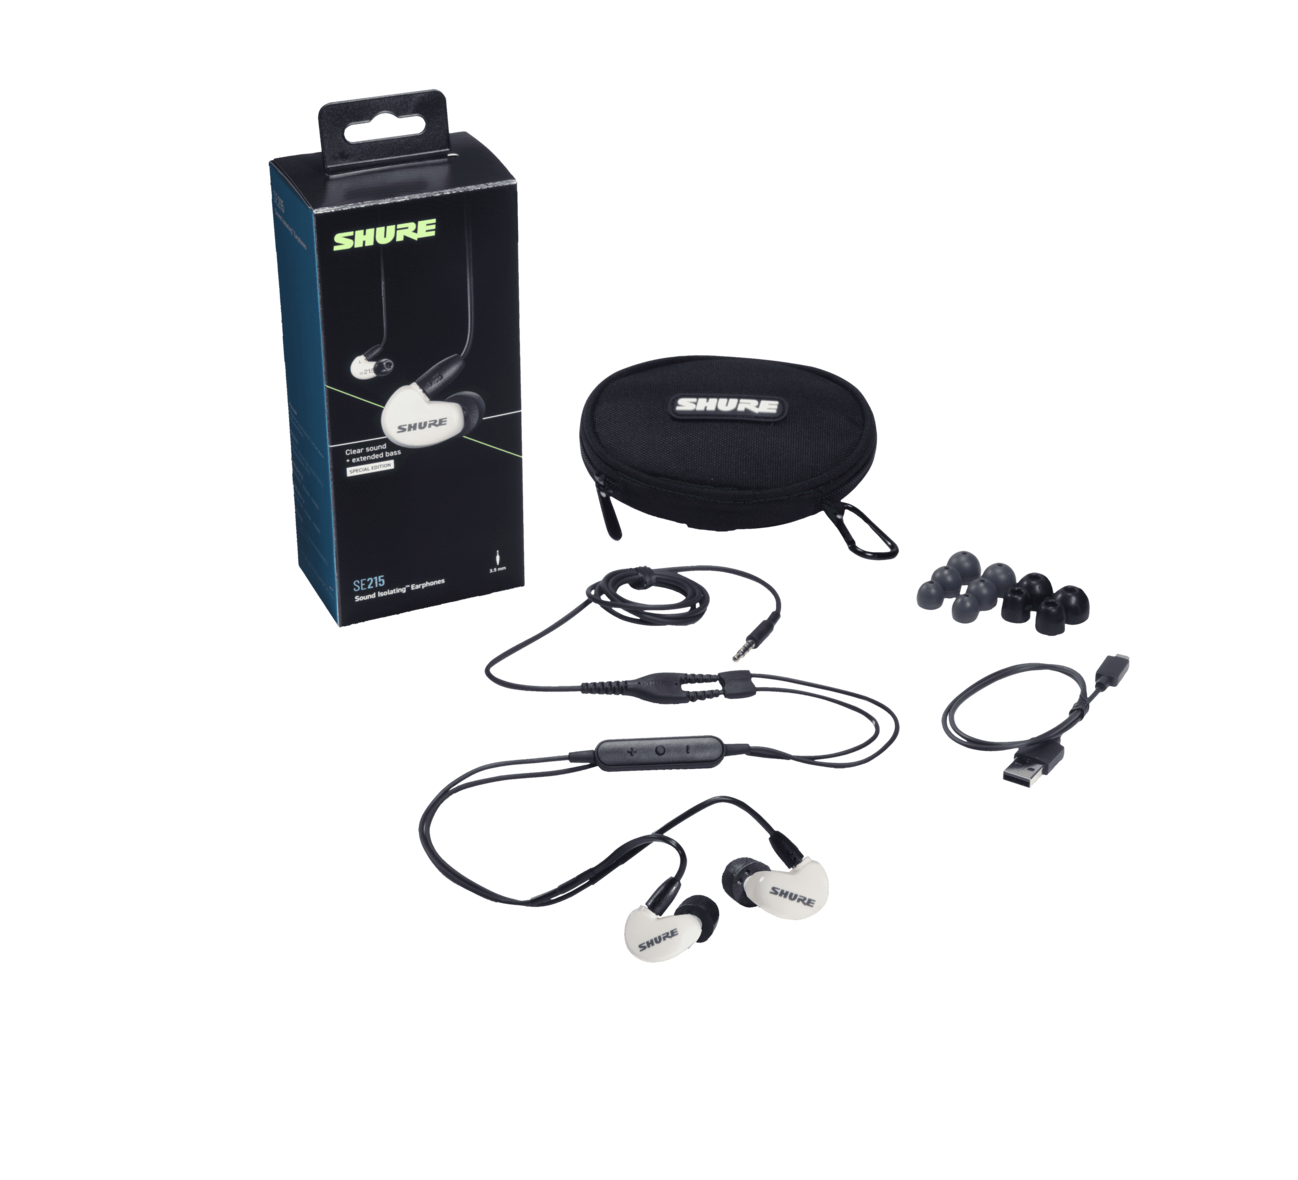 Shure SE215 Sound Isolating Earphones - with replaceable cable